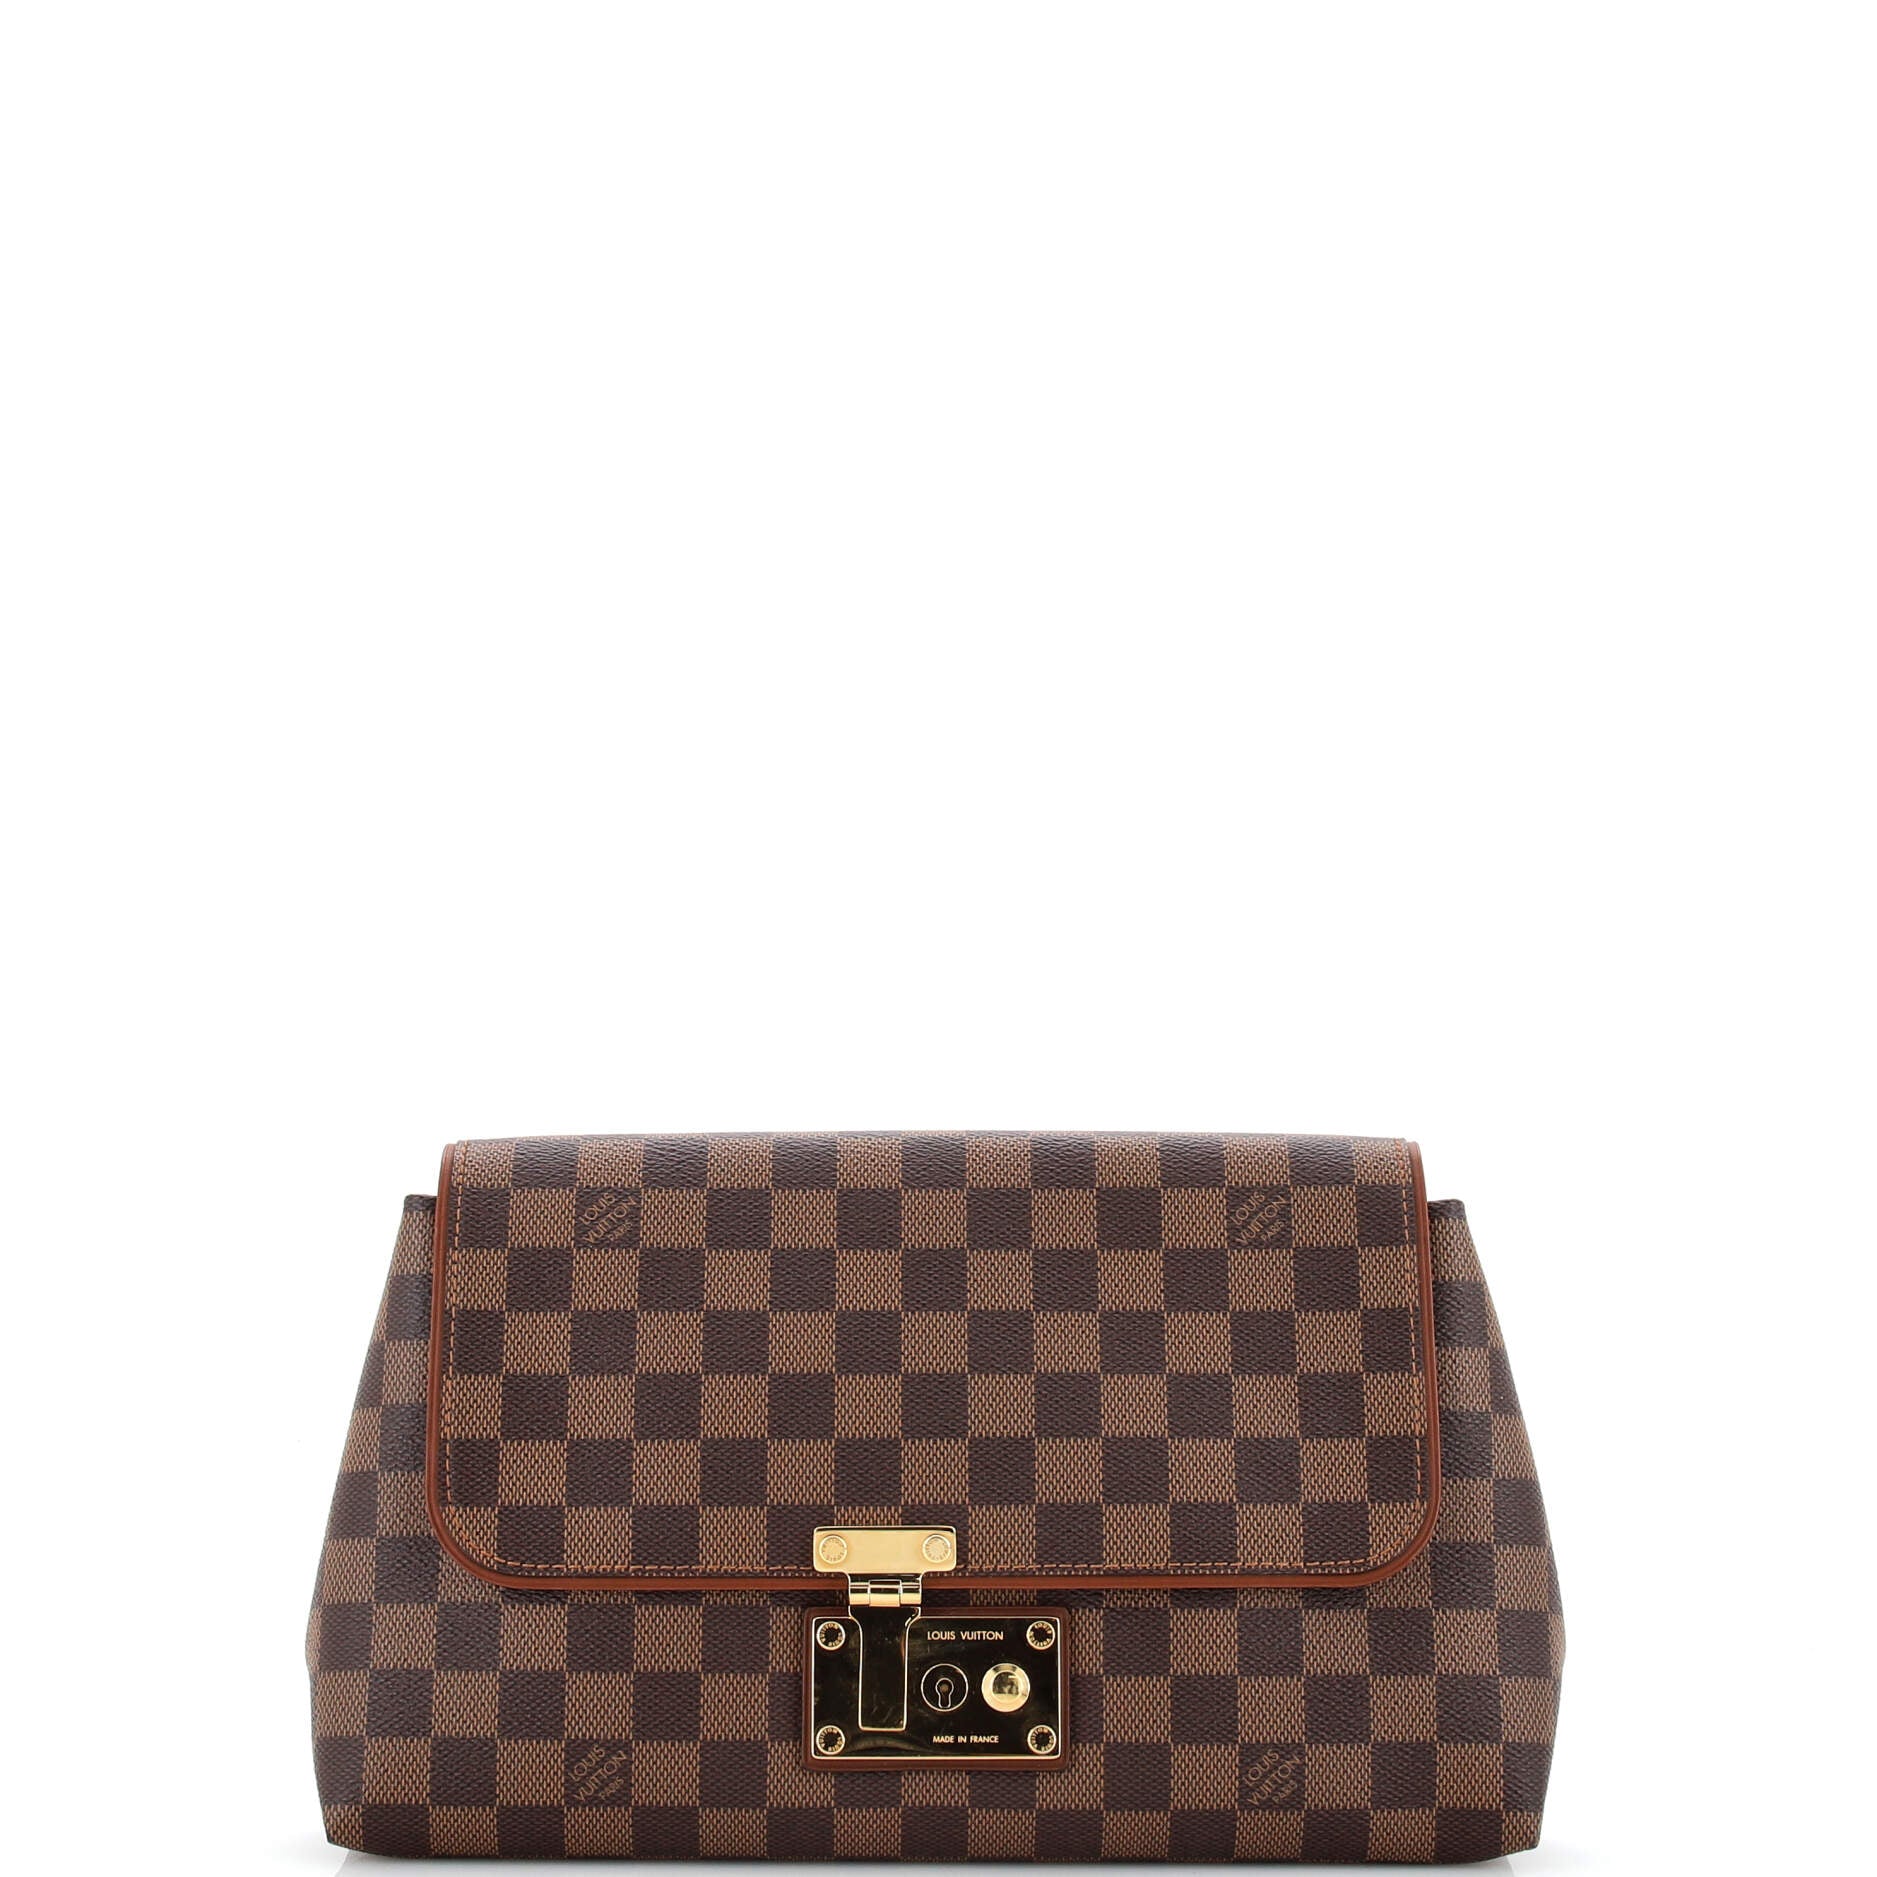 LV Damier Ebene Pochette Ascot Clutch. Limited Edition from LV and